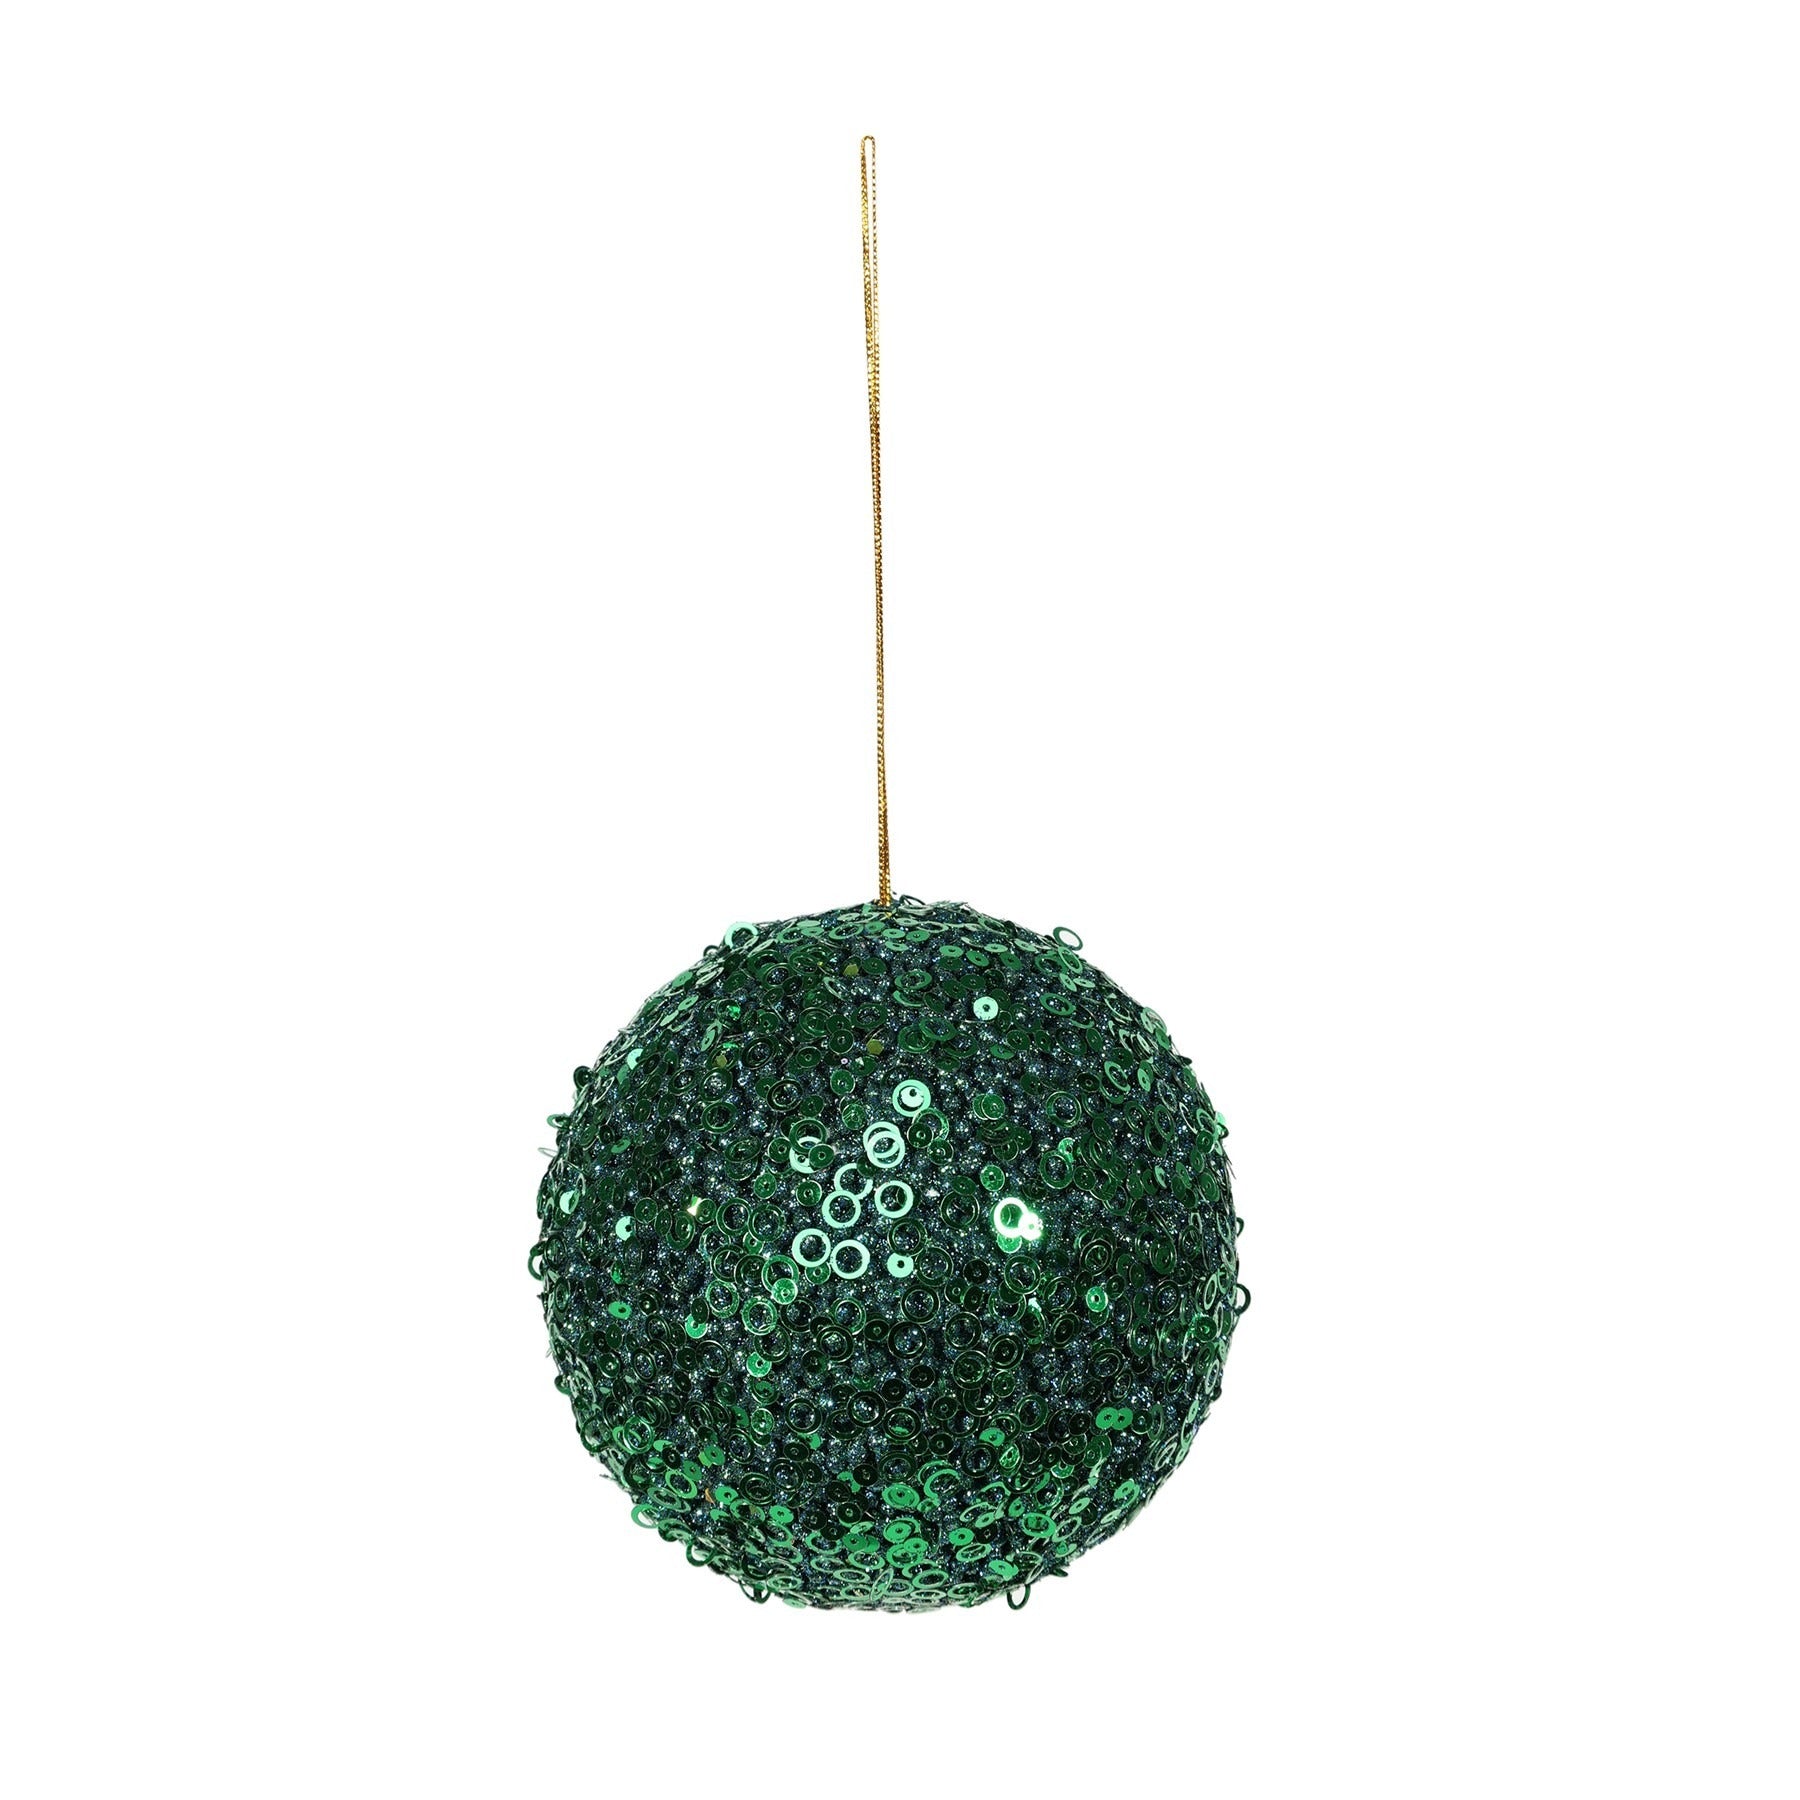 View Green Glitter Bauble Dia12cm information